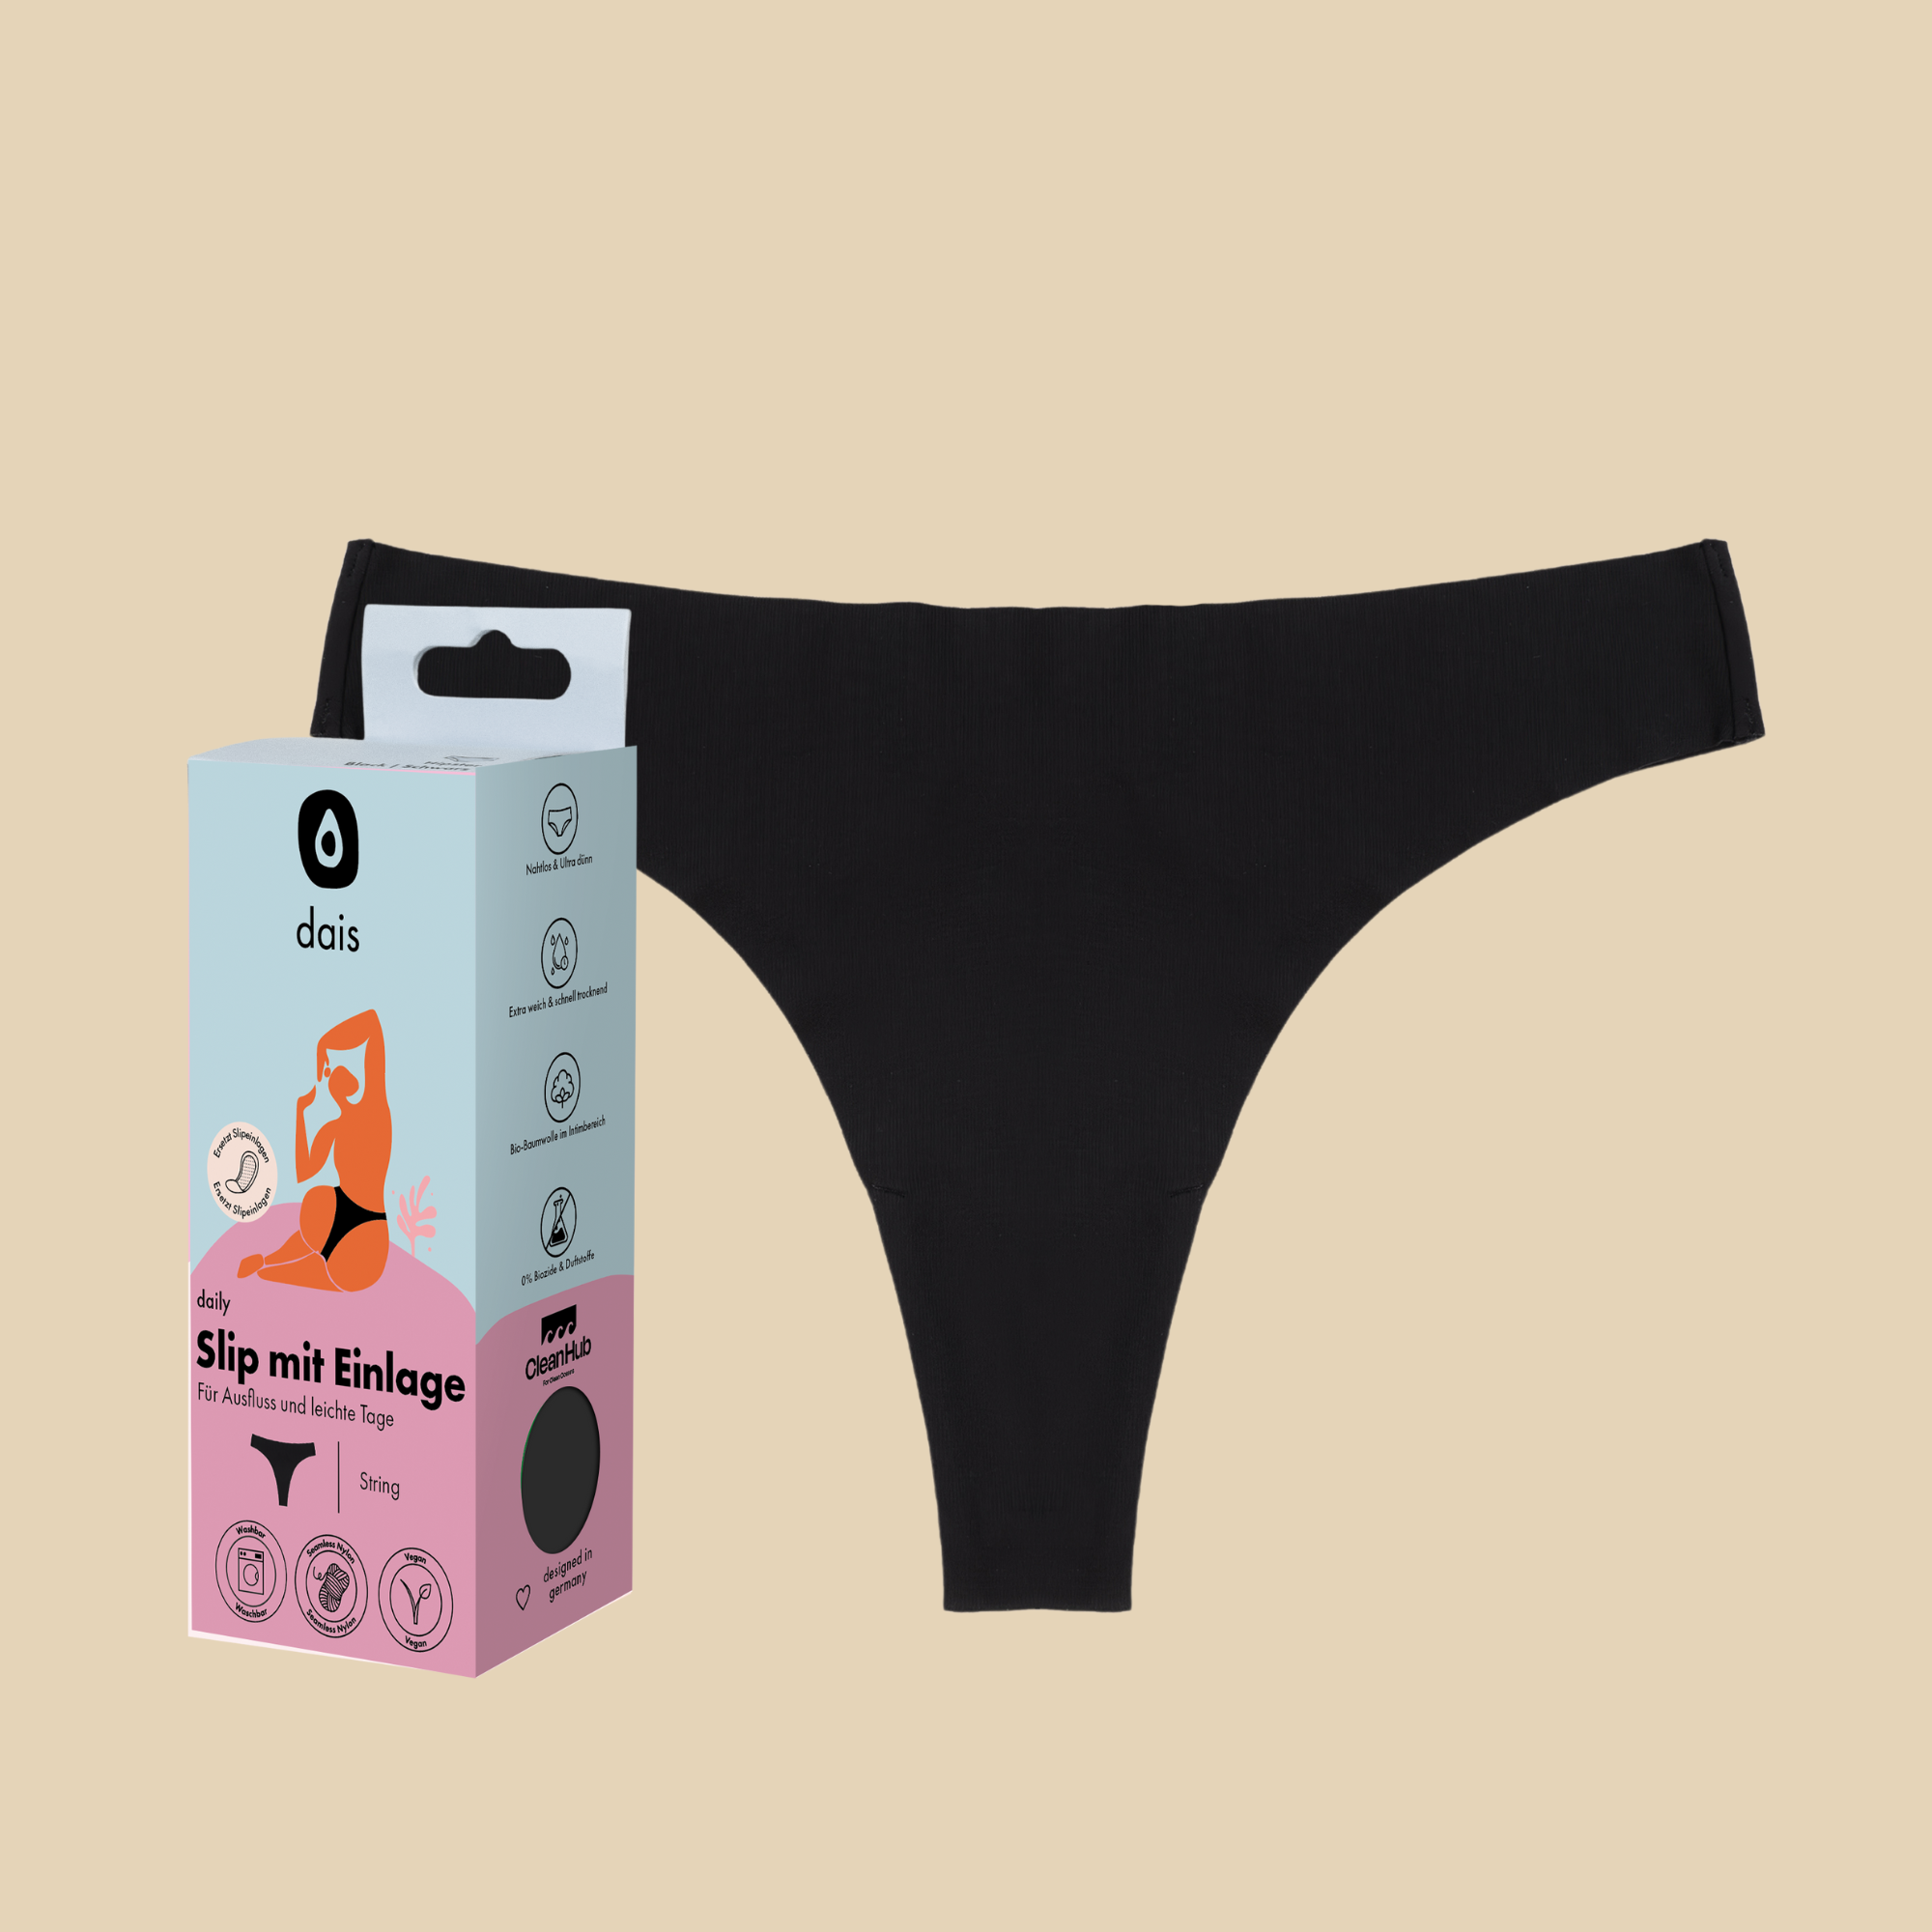 dais daily underwear in thong cut in black colour. Product shown with modern packaging.